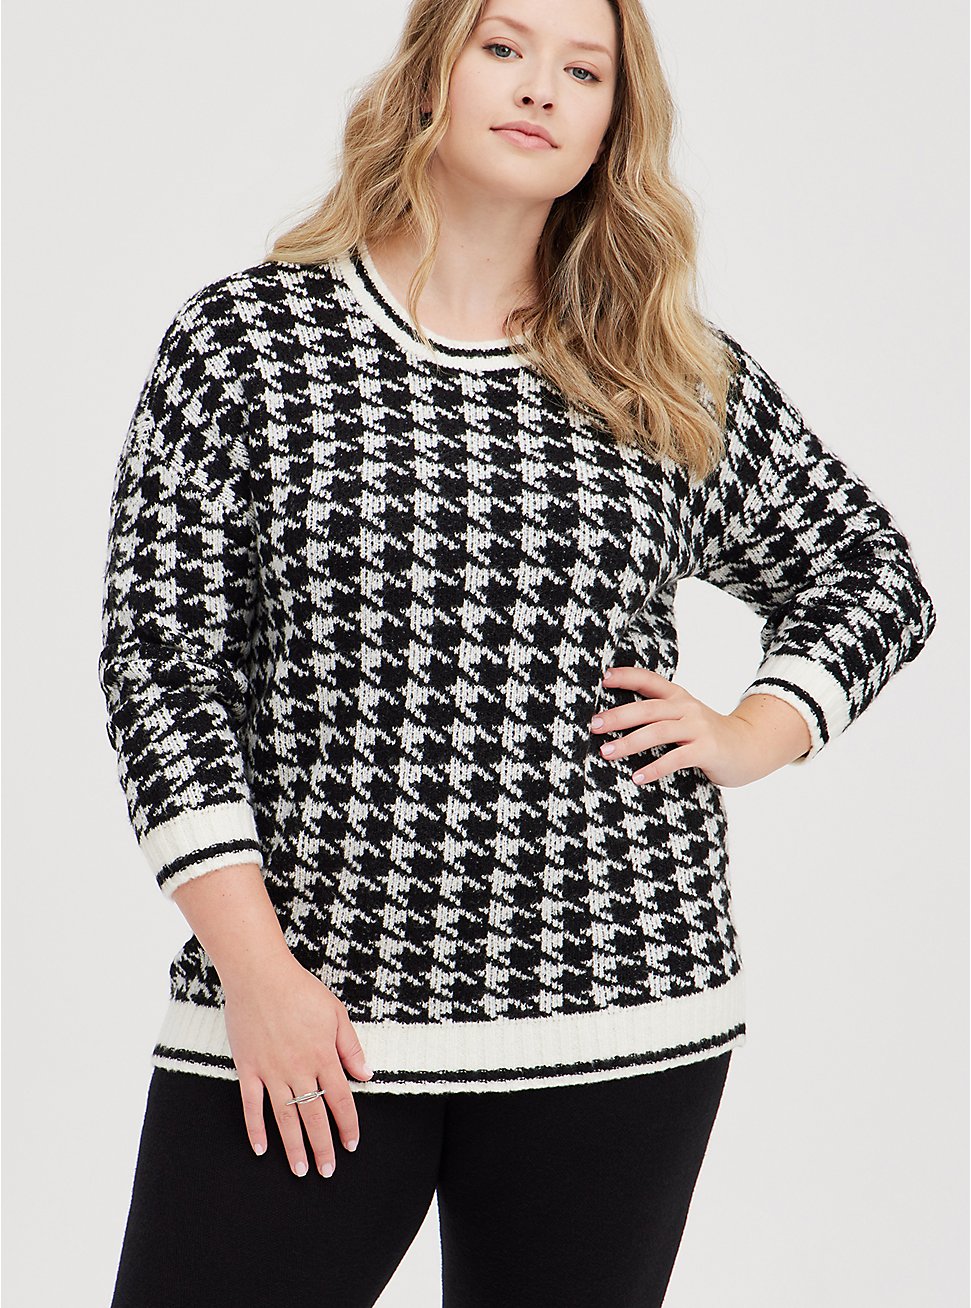 Crew Pullover Sweater - Houndstooth Black & White, MULTI, hi-res